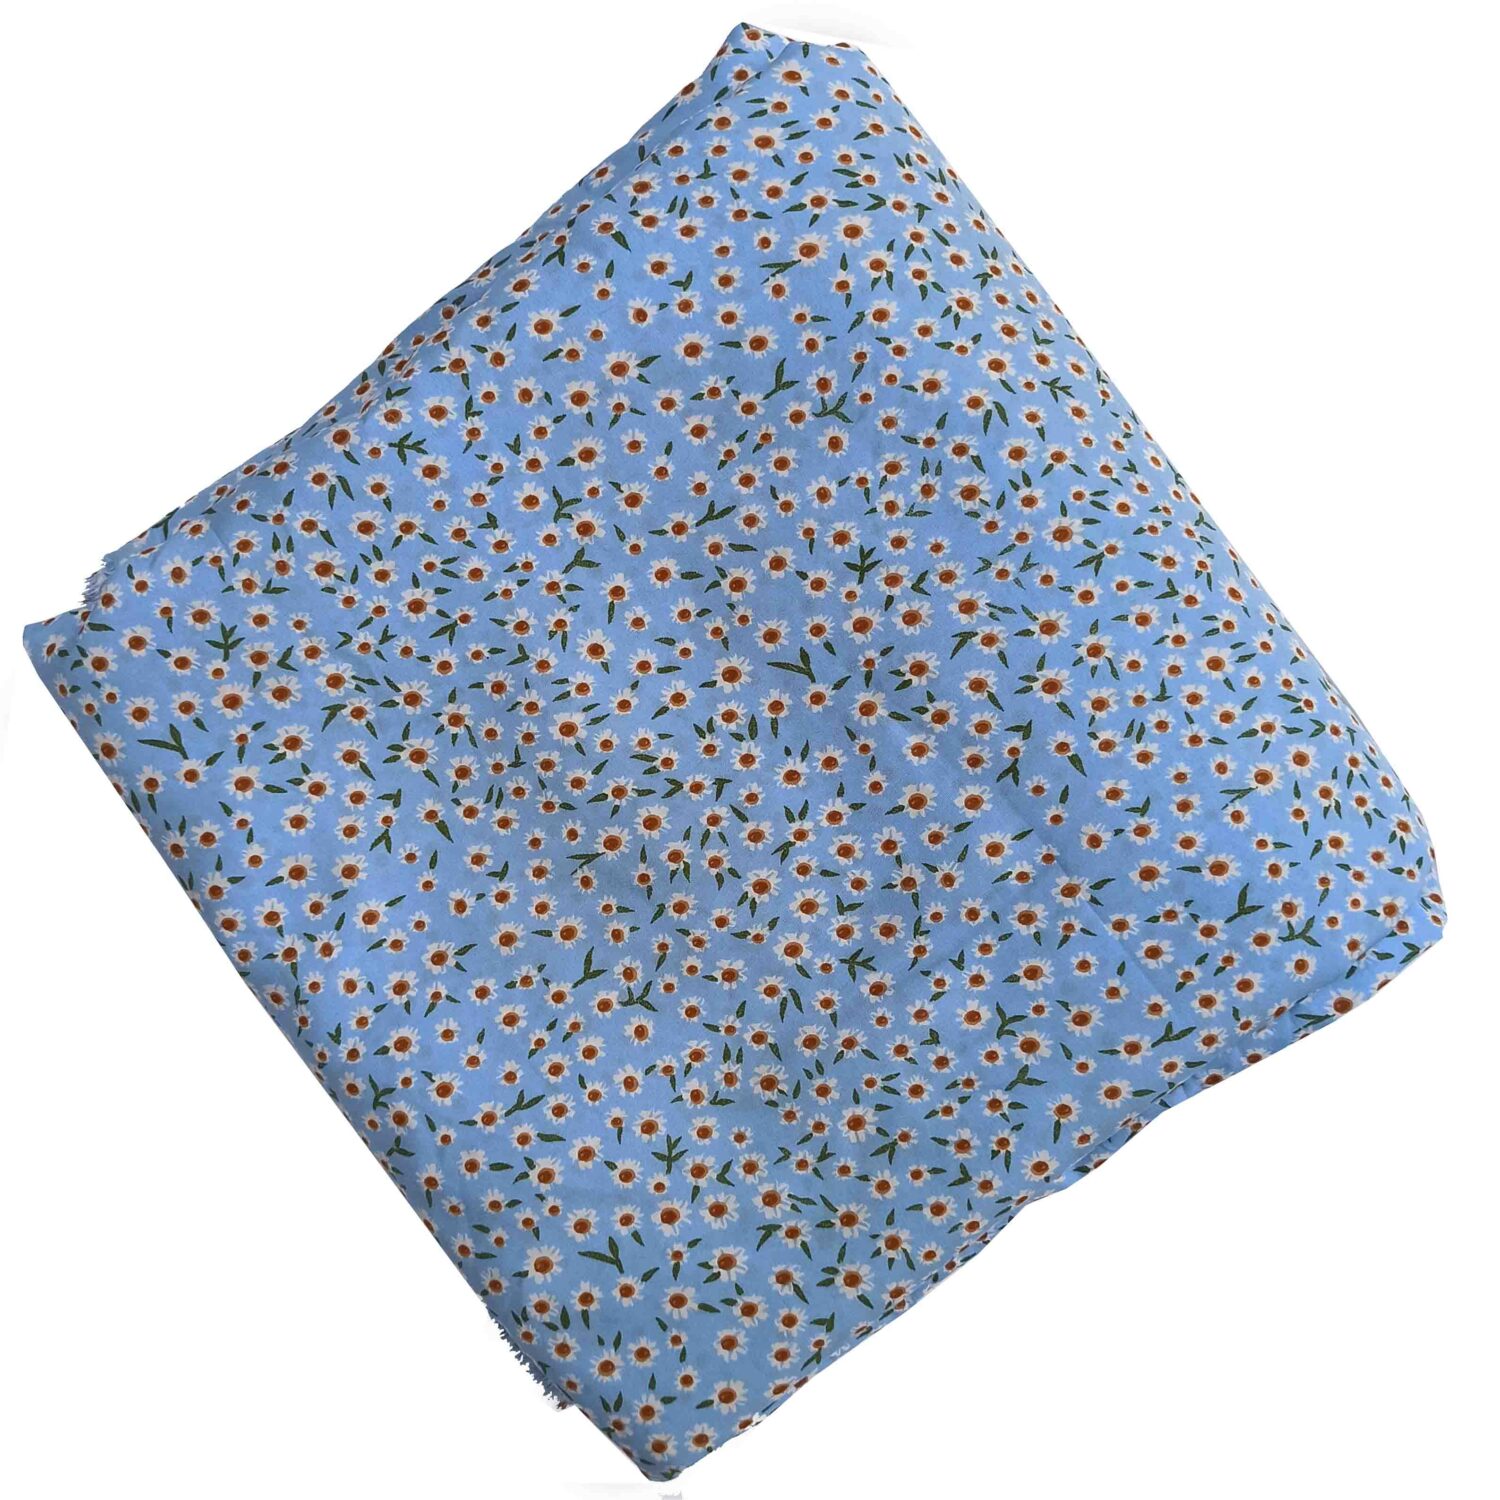 Light Blue American Crepe Fabric with Small Flower Print PAC53